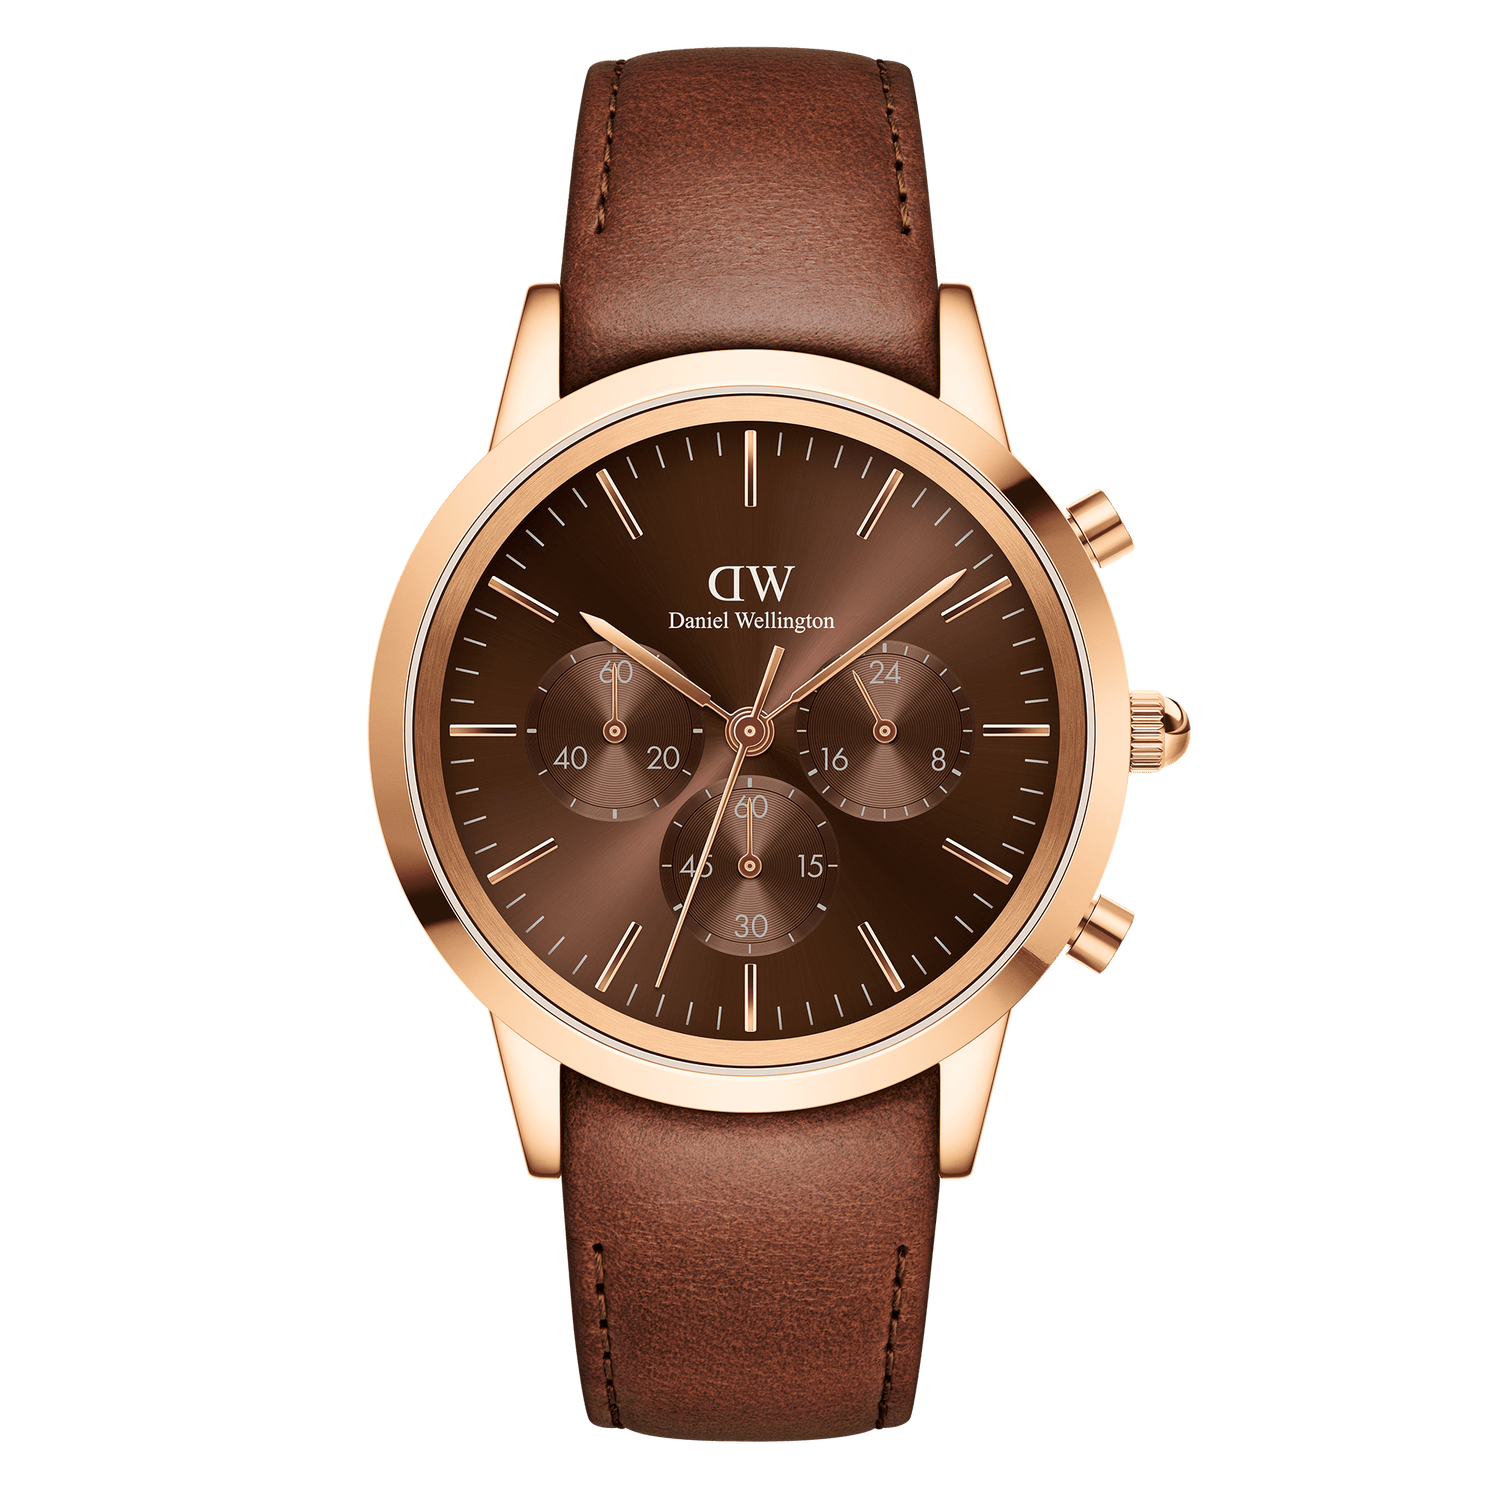 Men's watches - Watches for men in Silver and Rose Gold | DW